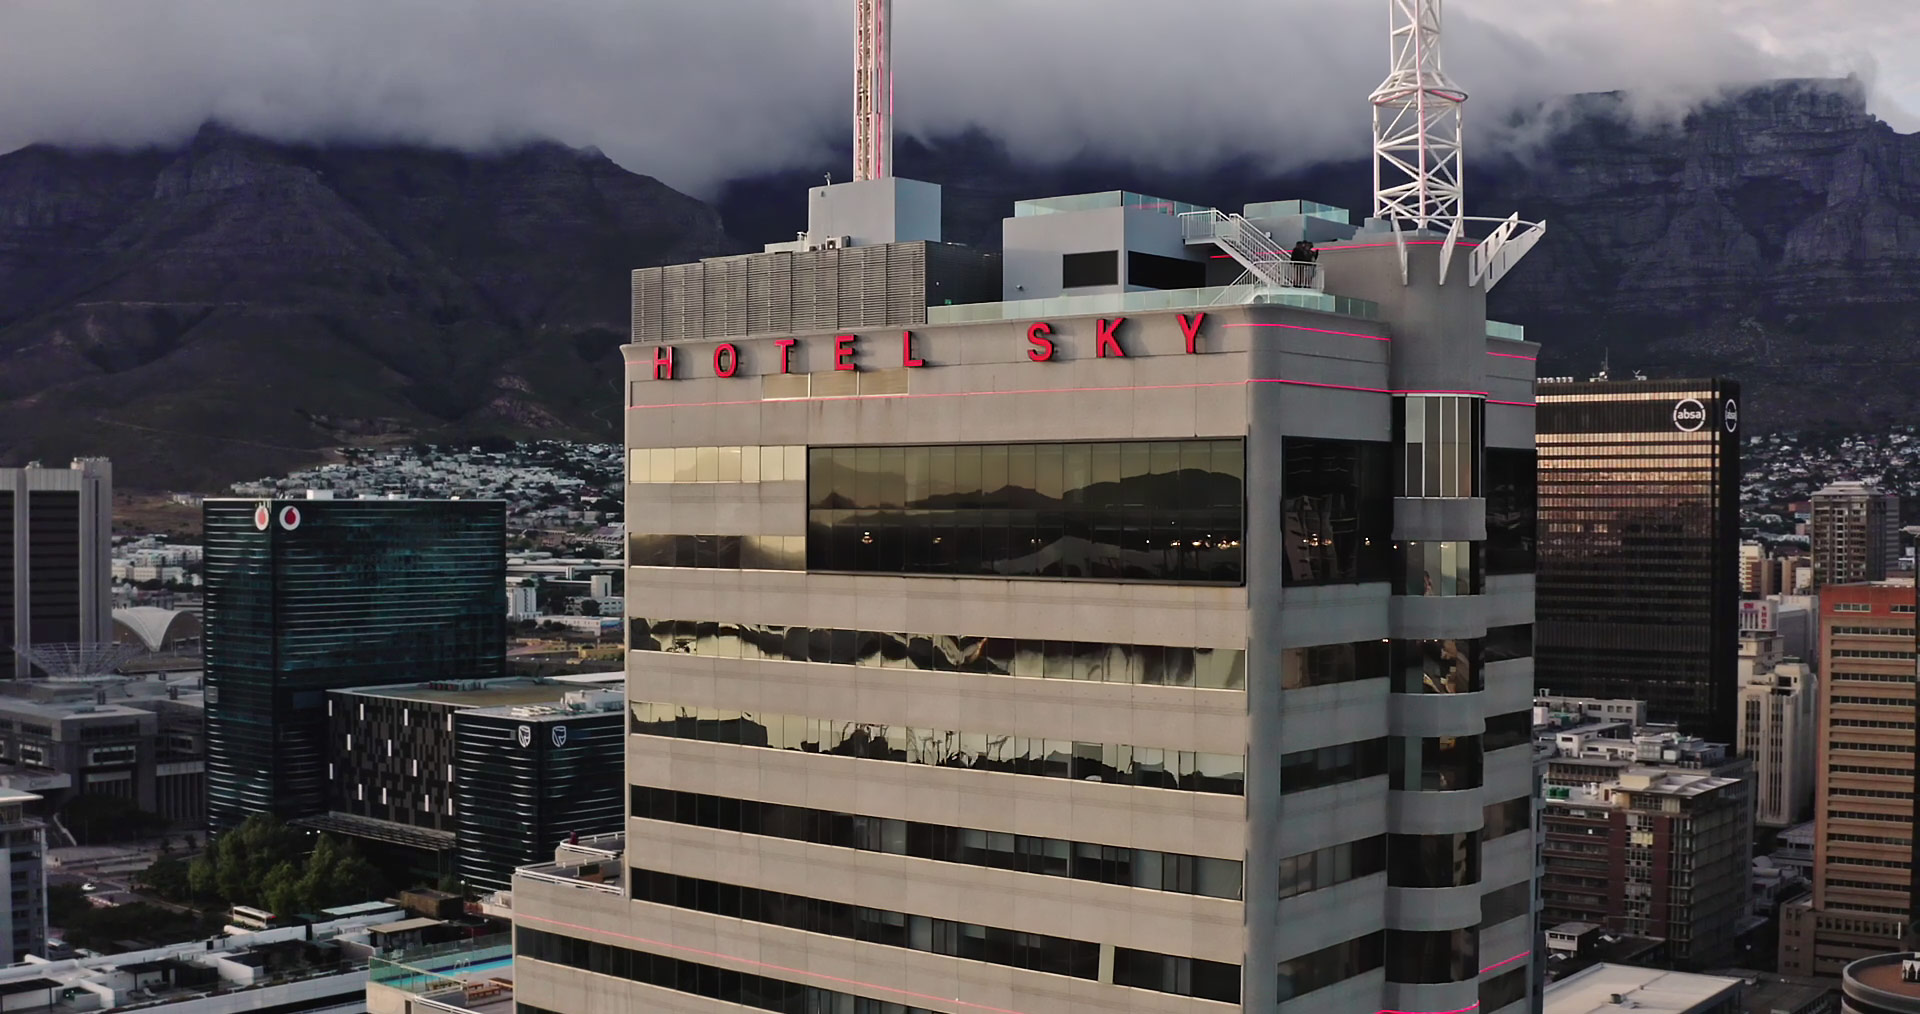 Hotel Sky in Cape Town featuring the space-saving SuperTube drainage system in a renovation project